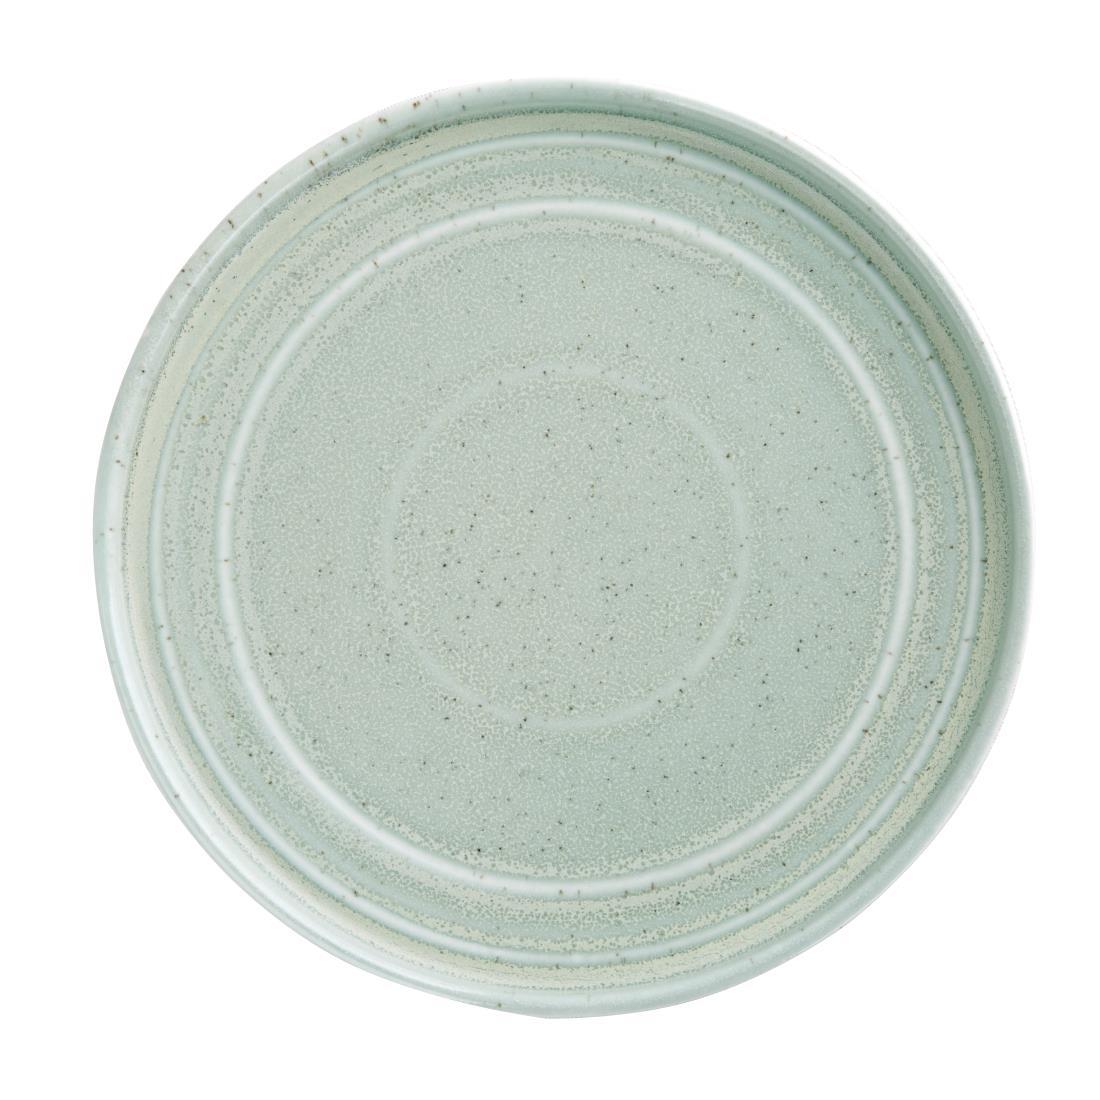 Olympia Cavolo Flat Round Plates Spring Green 220mm (Pack of 6) - FB563  - 1